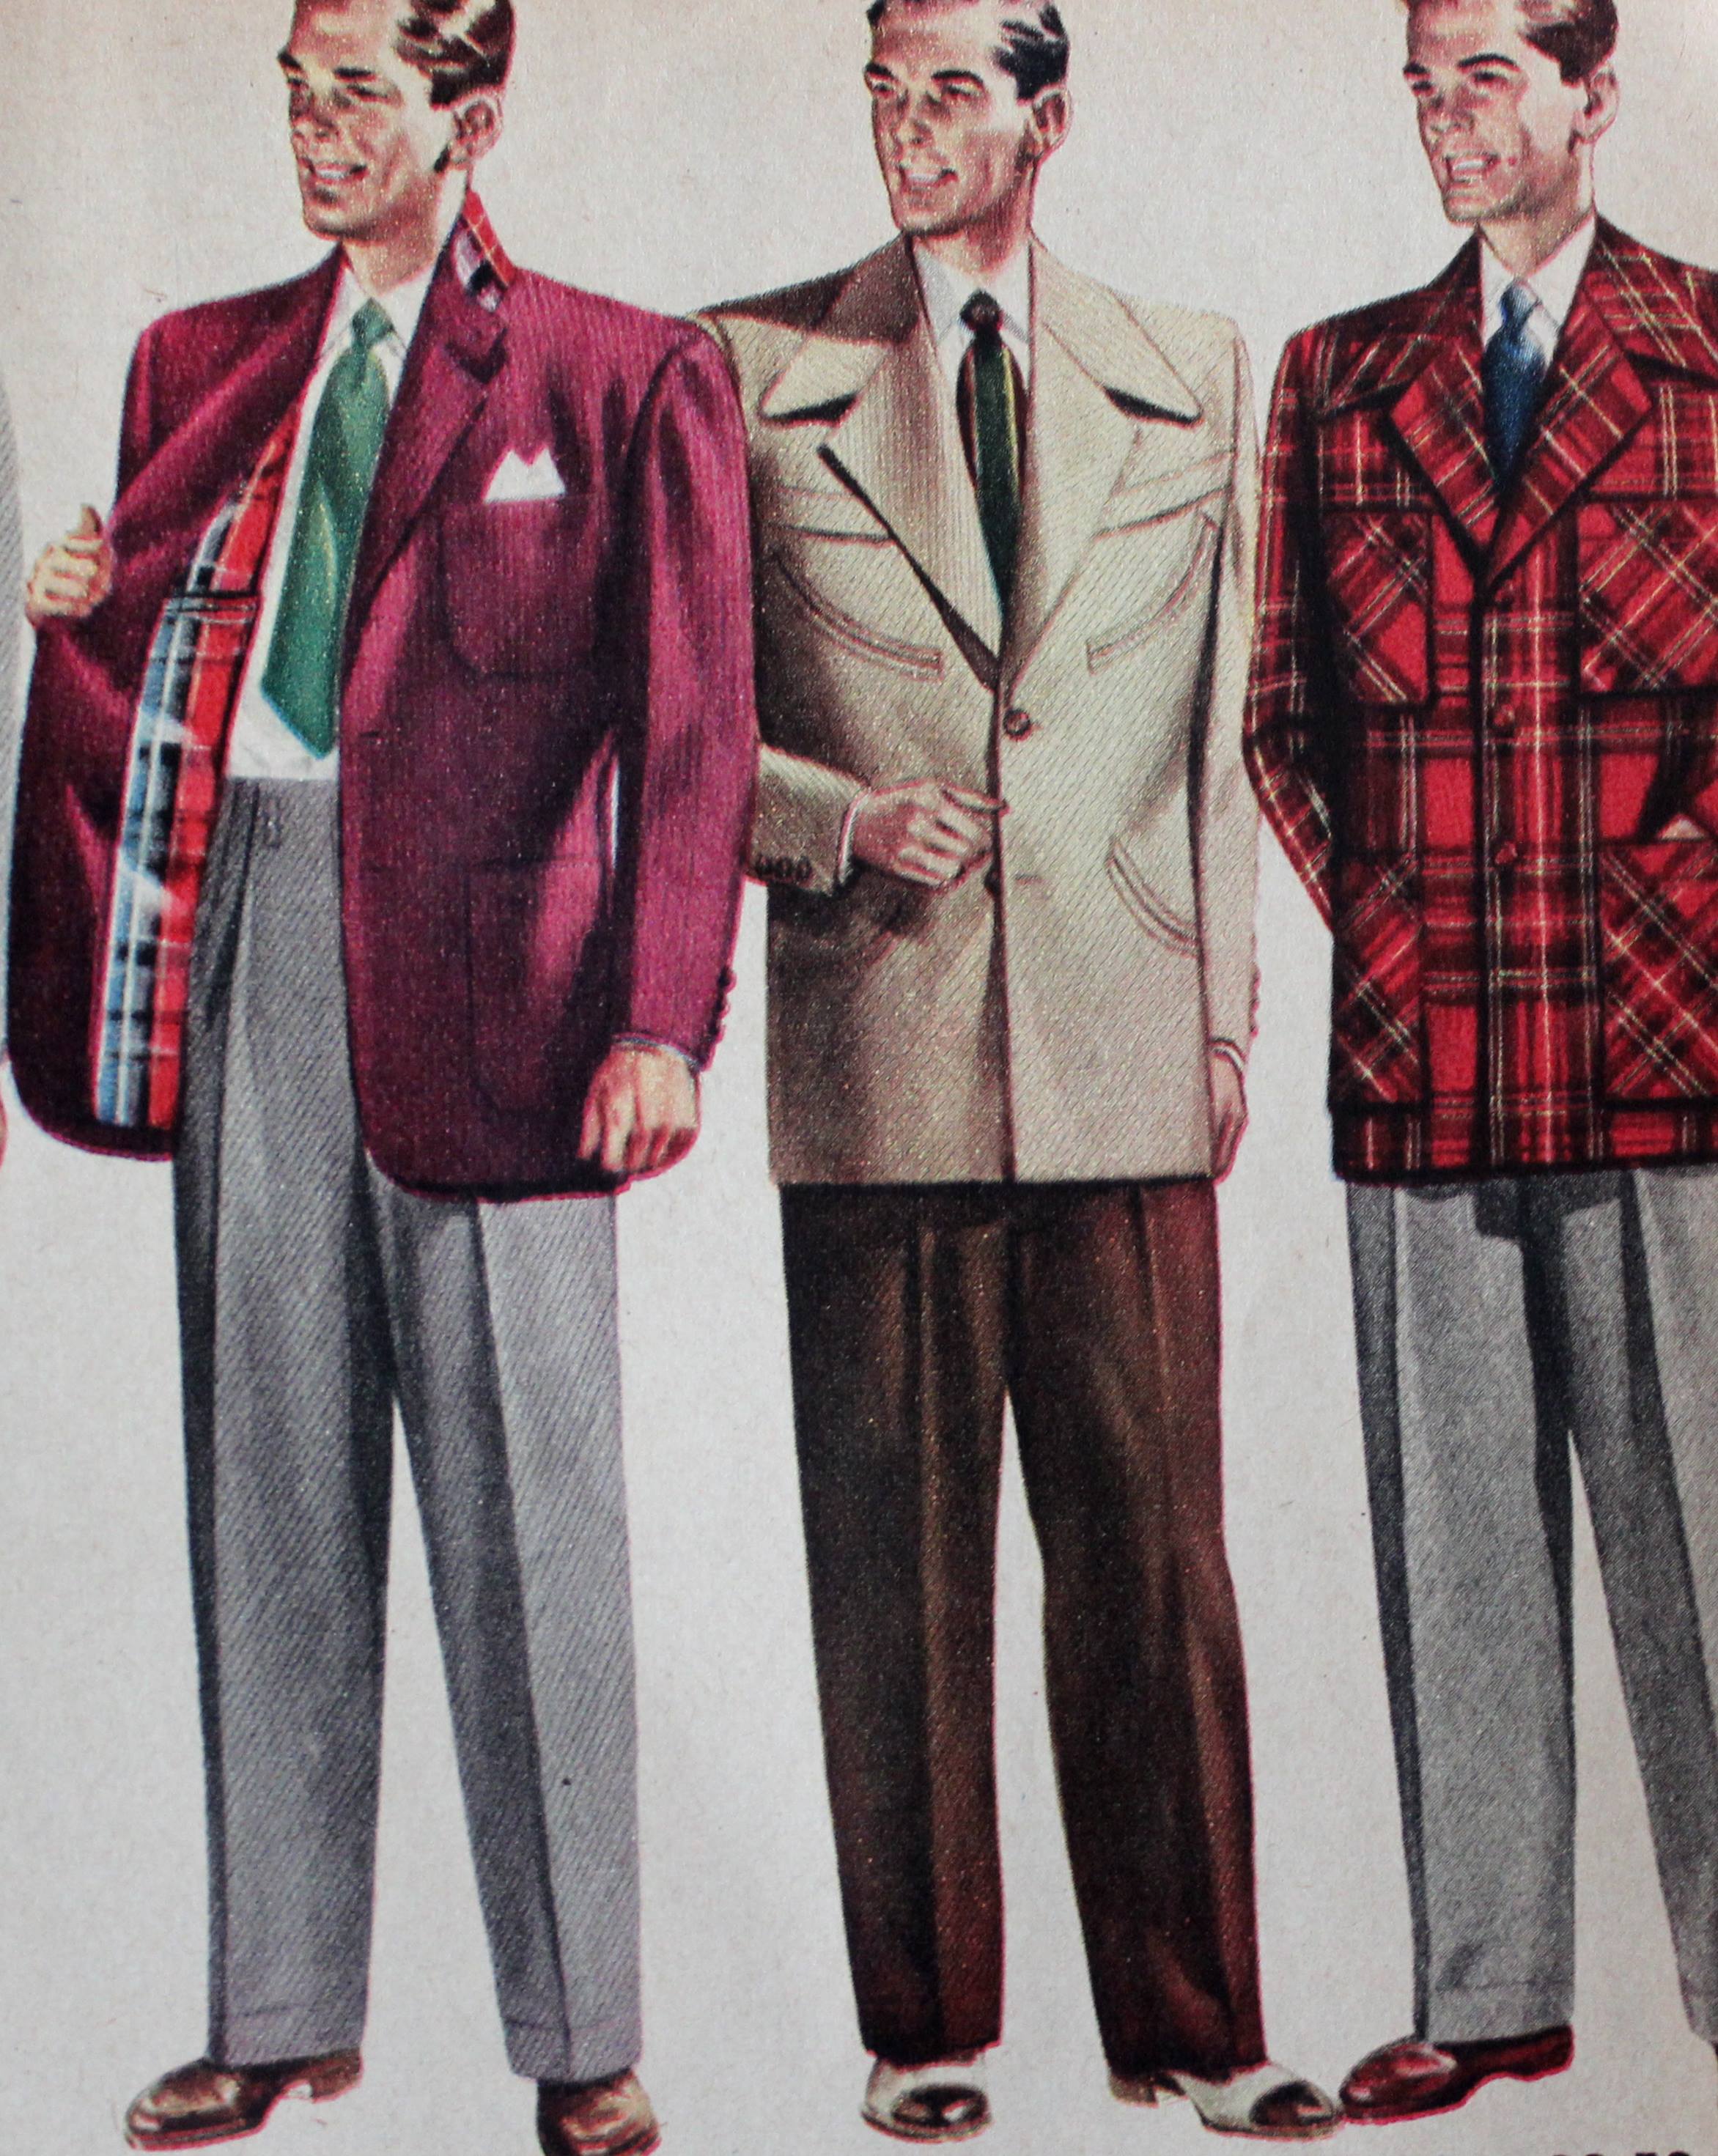 1950s Men's Clothing | 50s Style Mens Fashion